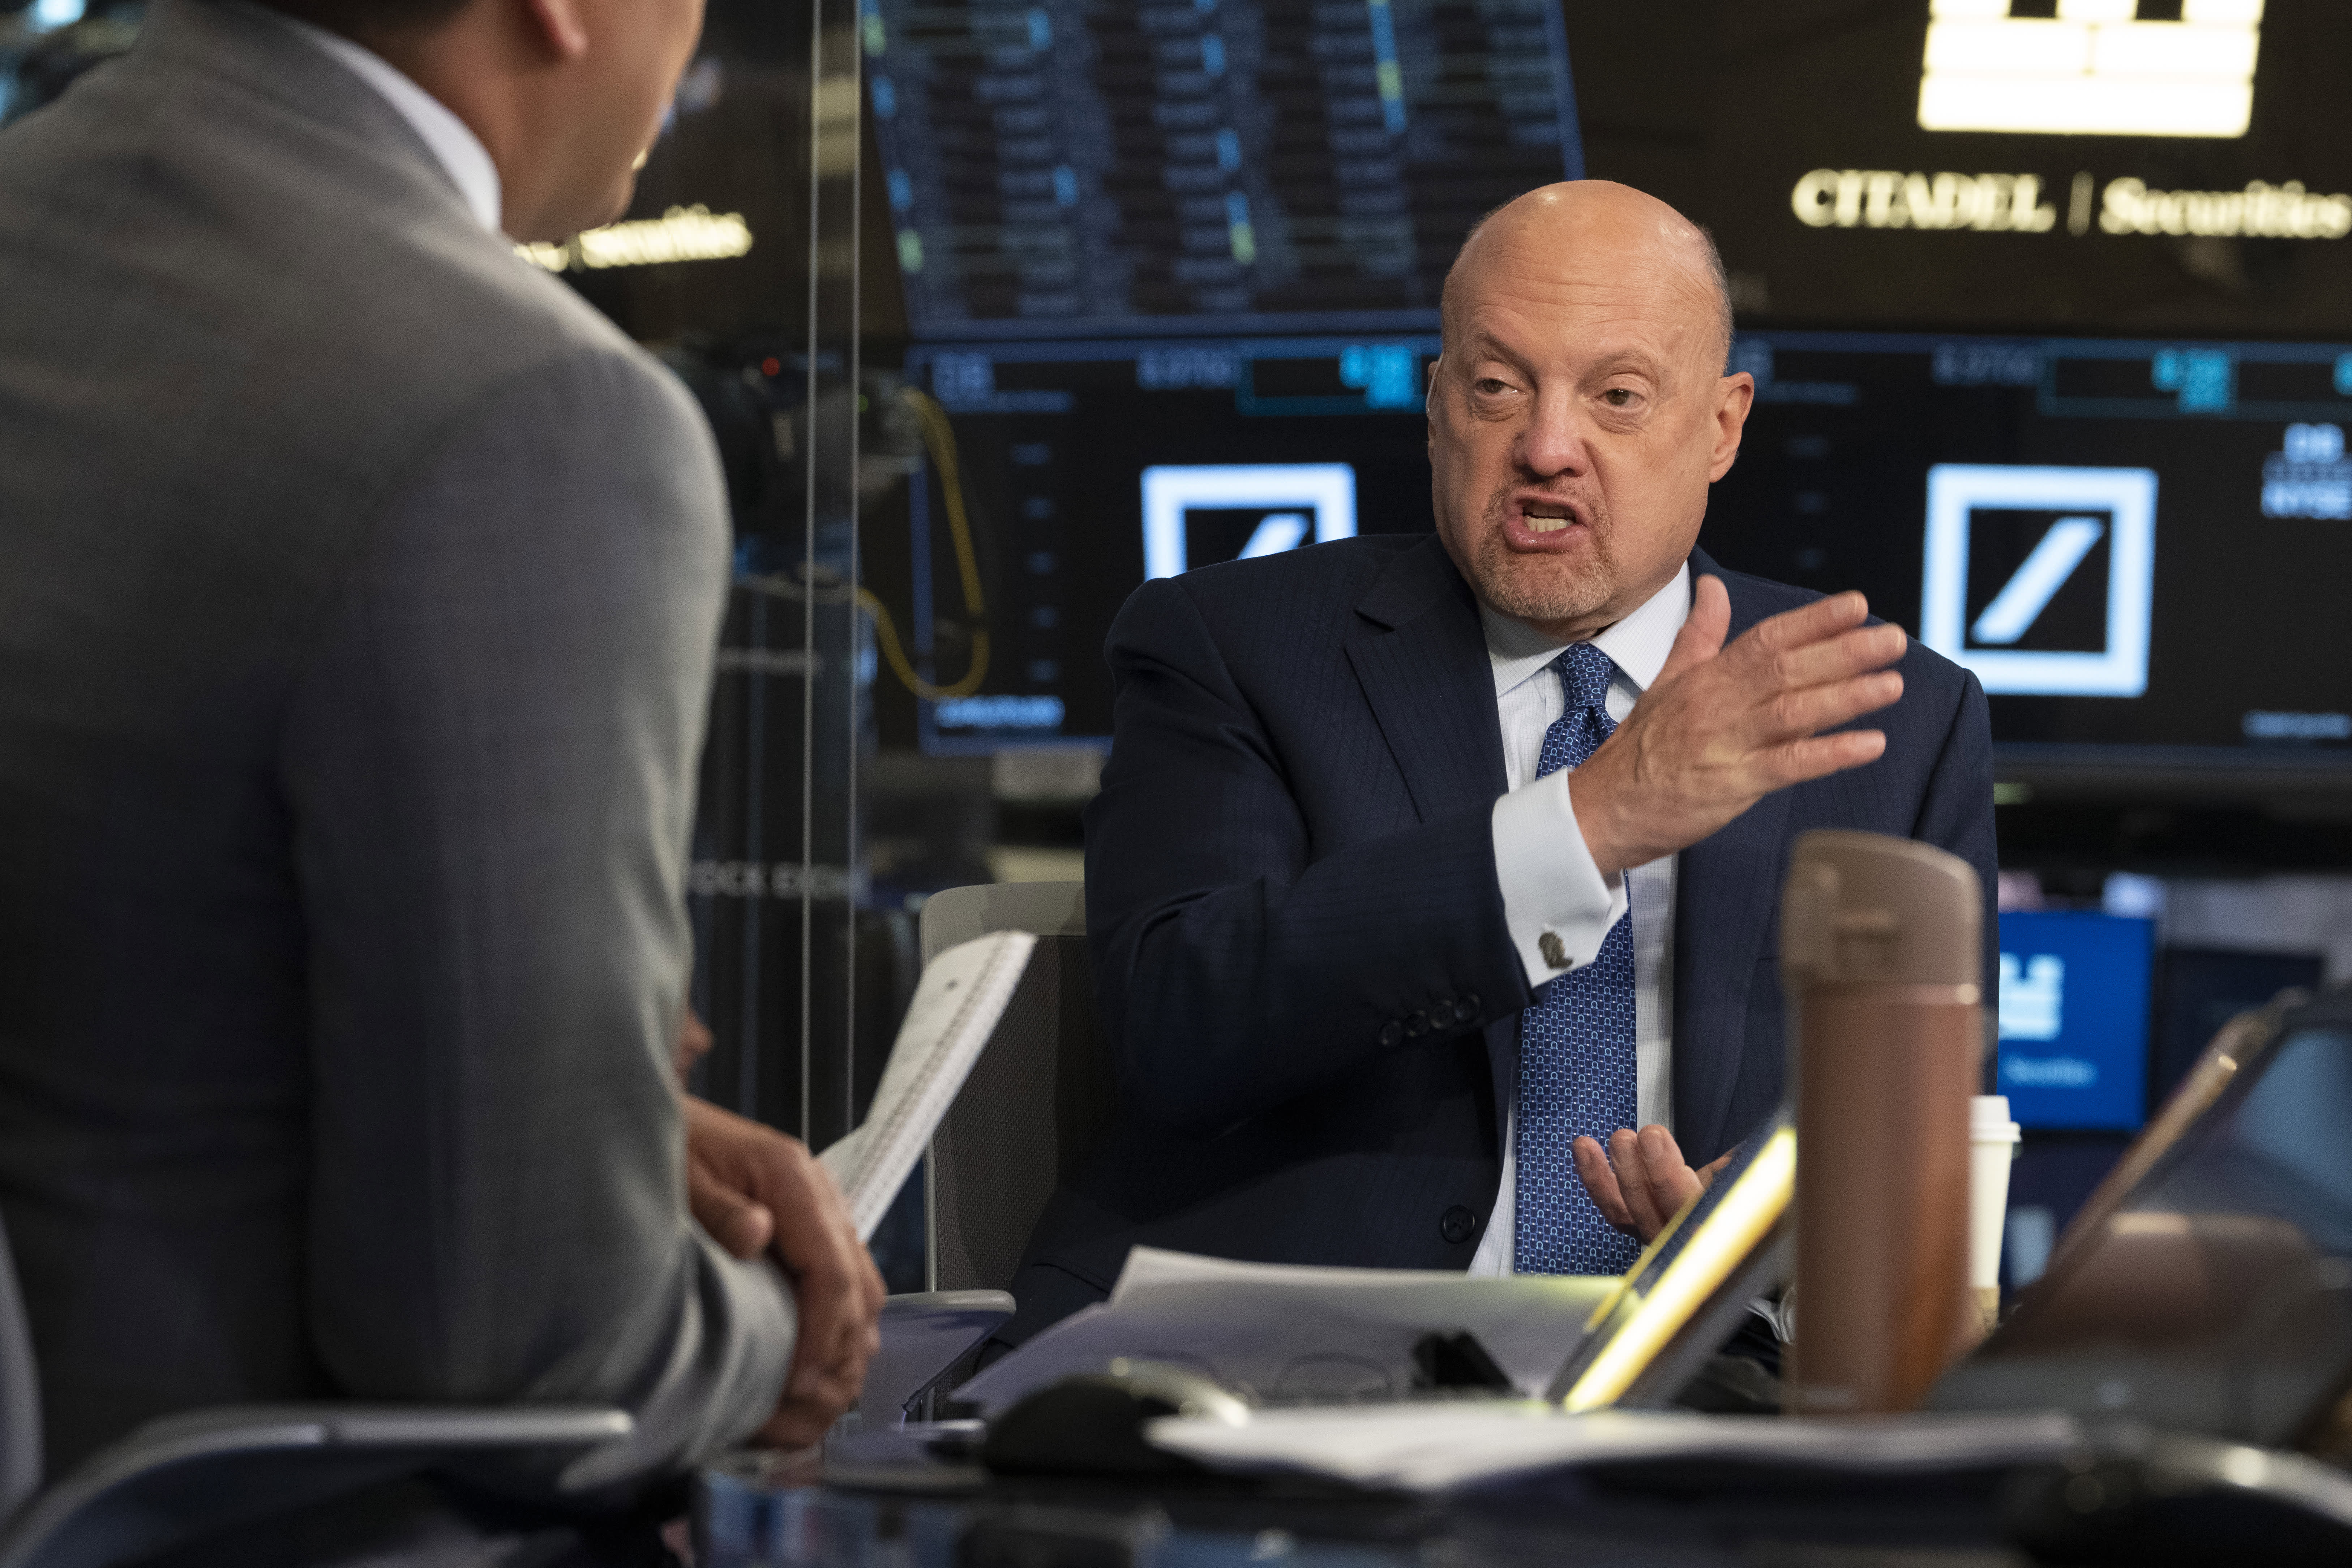 3 takeaways from our daily meeting: Buying health stocks, Danaher China play, tech cutting costs